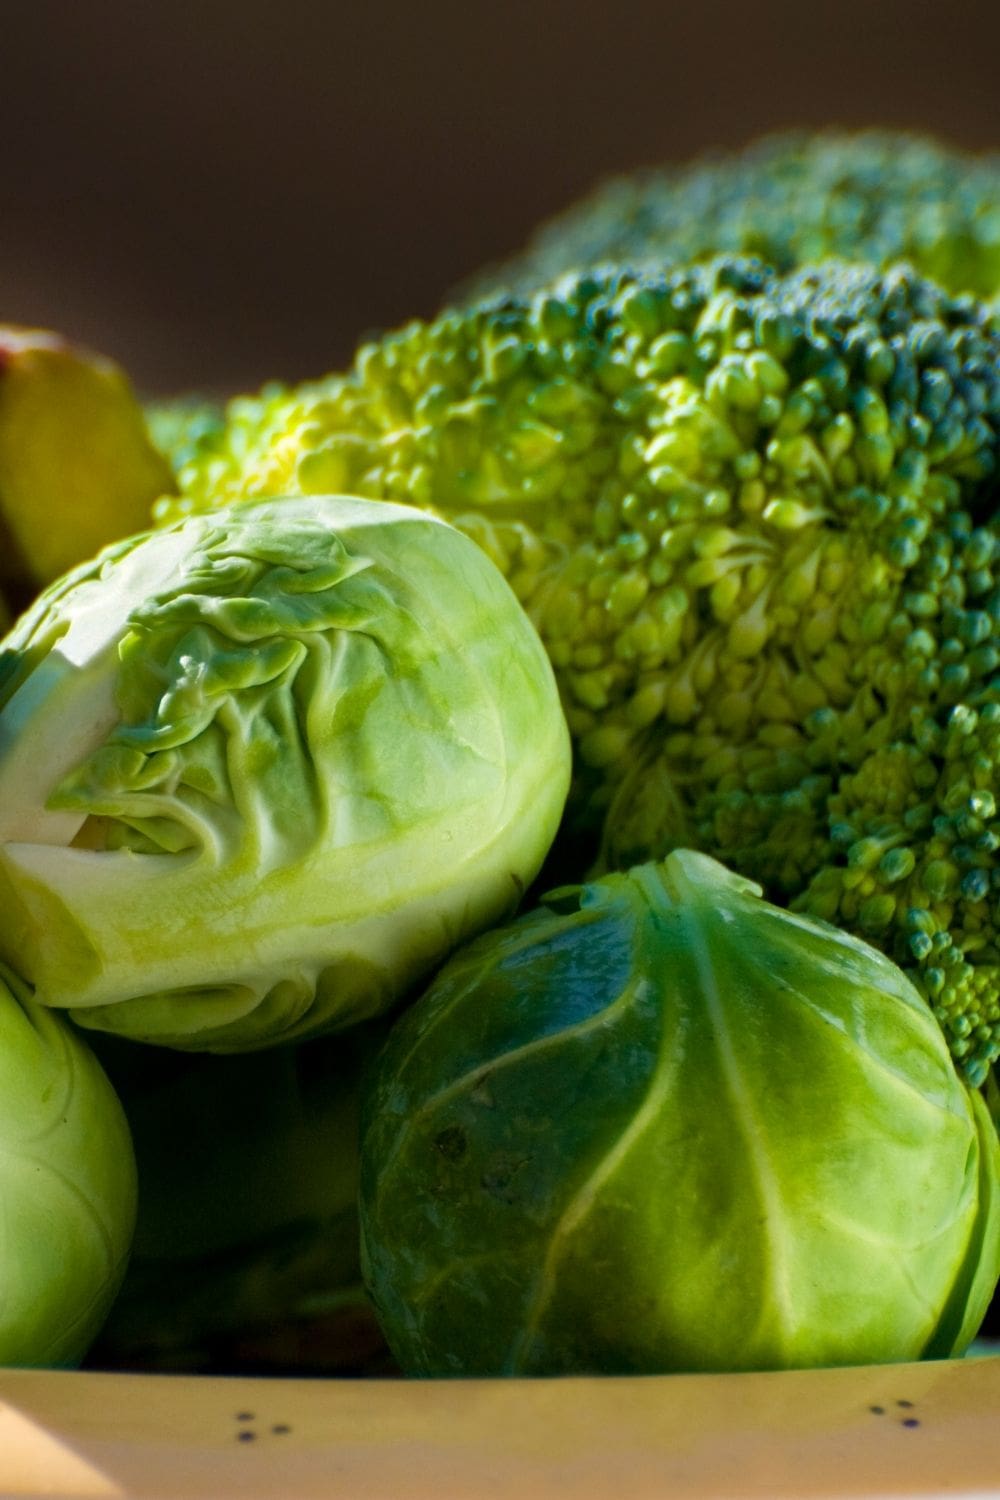 brussels sprouts and broccoli in season in october